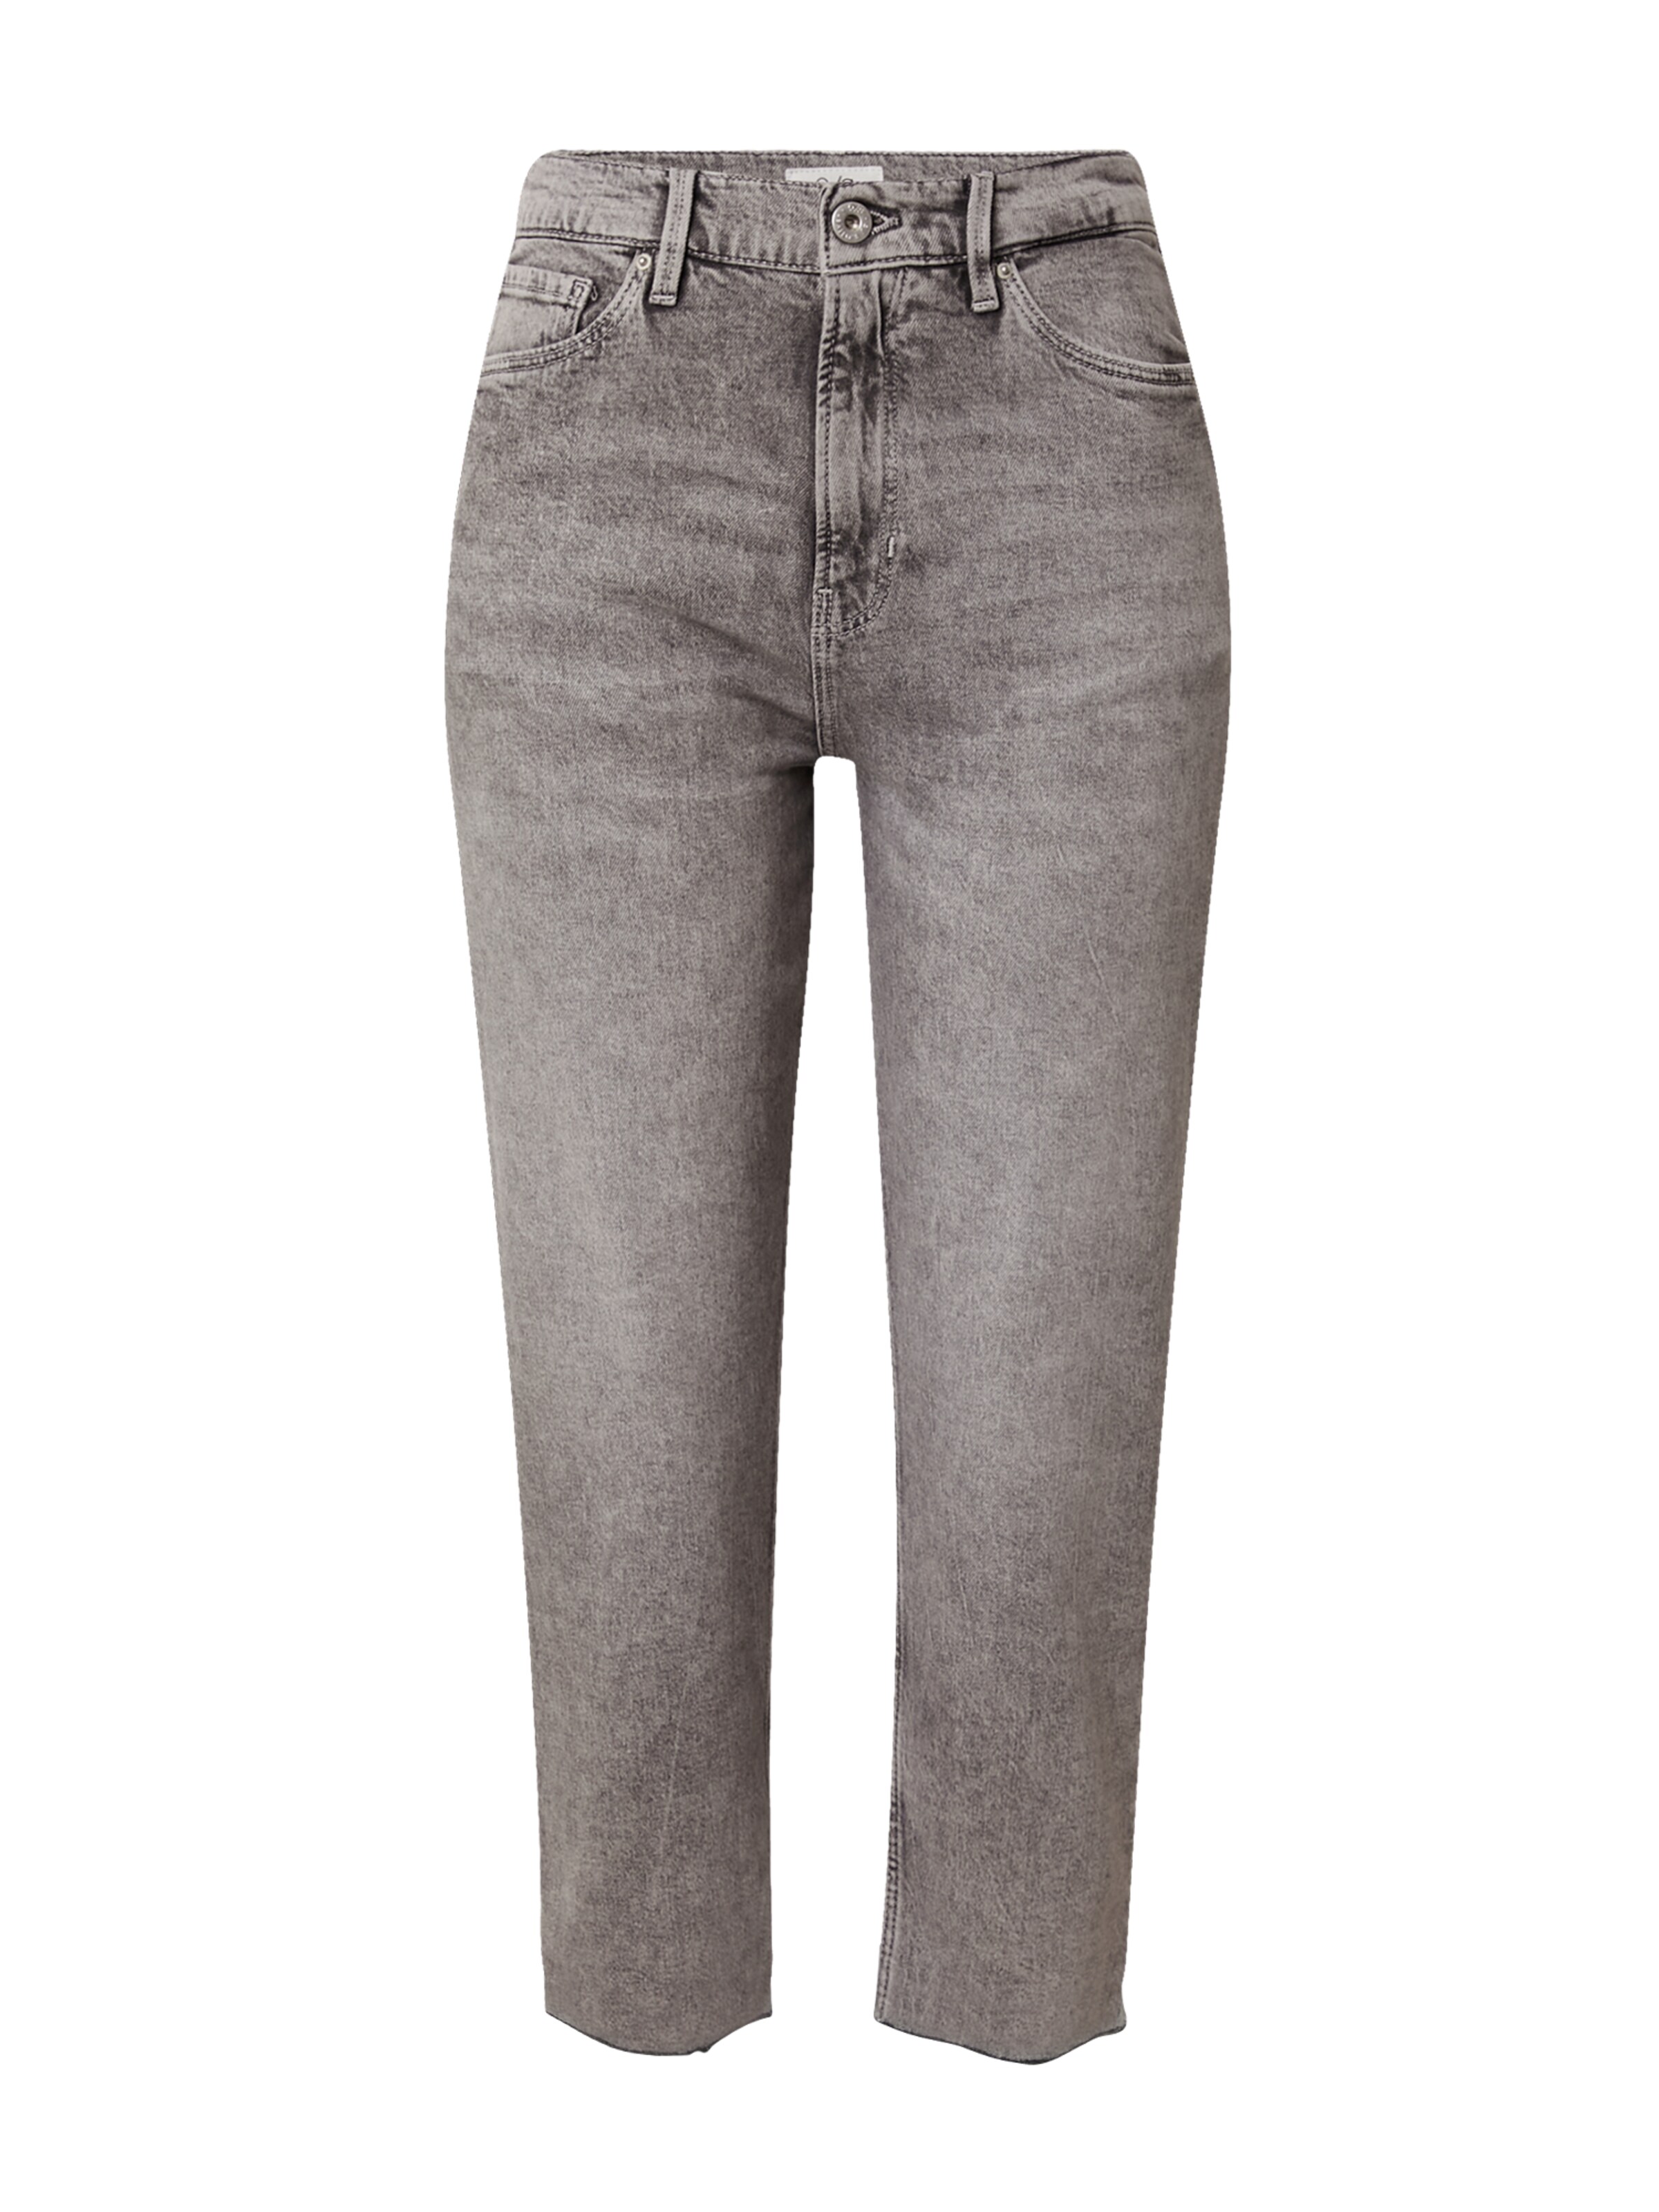 Jeans Donna Q/S by s.Oliver Jeans in Grigio 